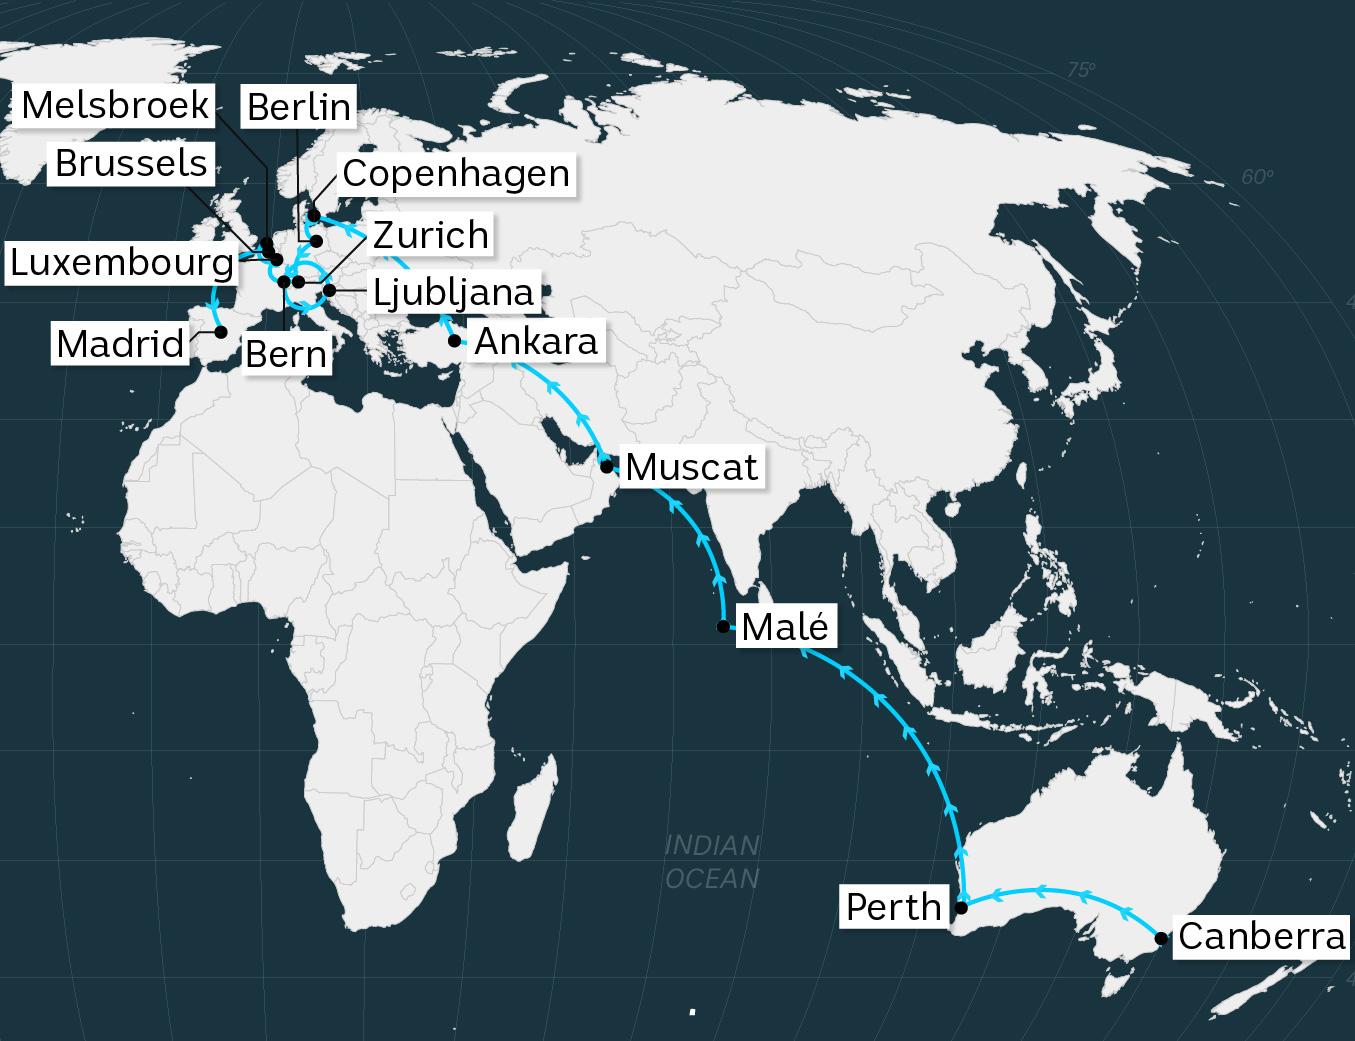 A map of the globe showing the cities Mathias Cormann has flown to around the globe